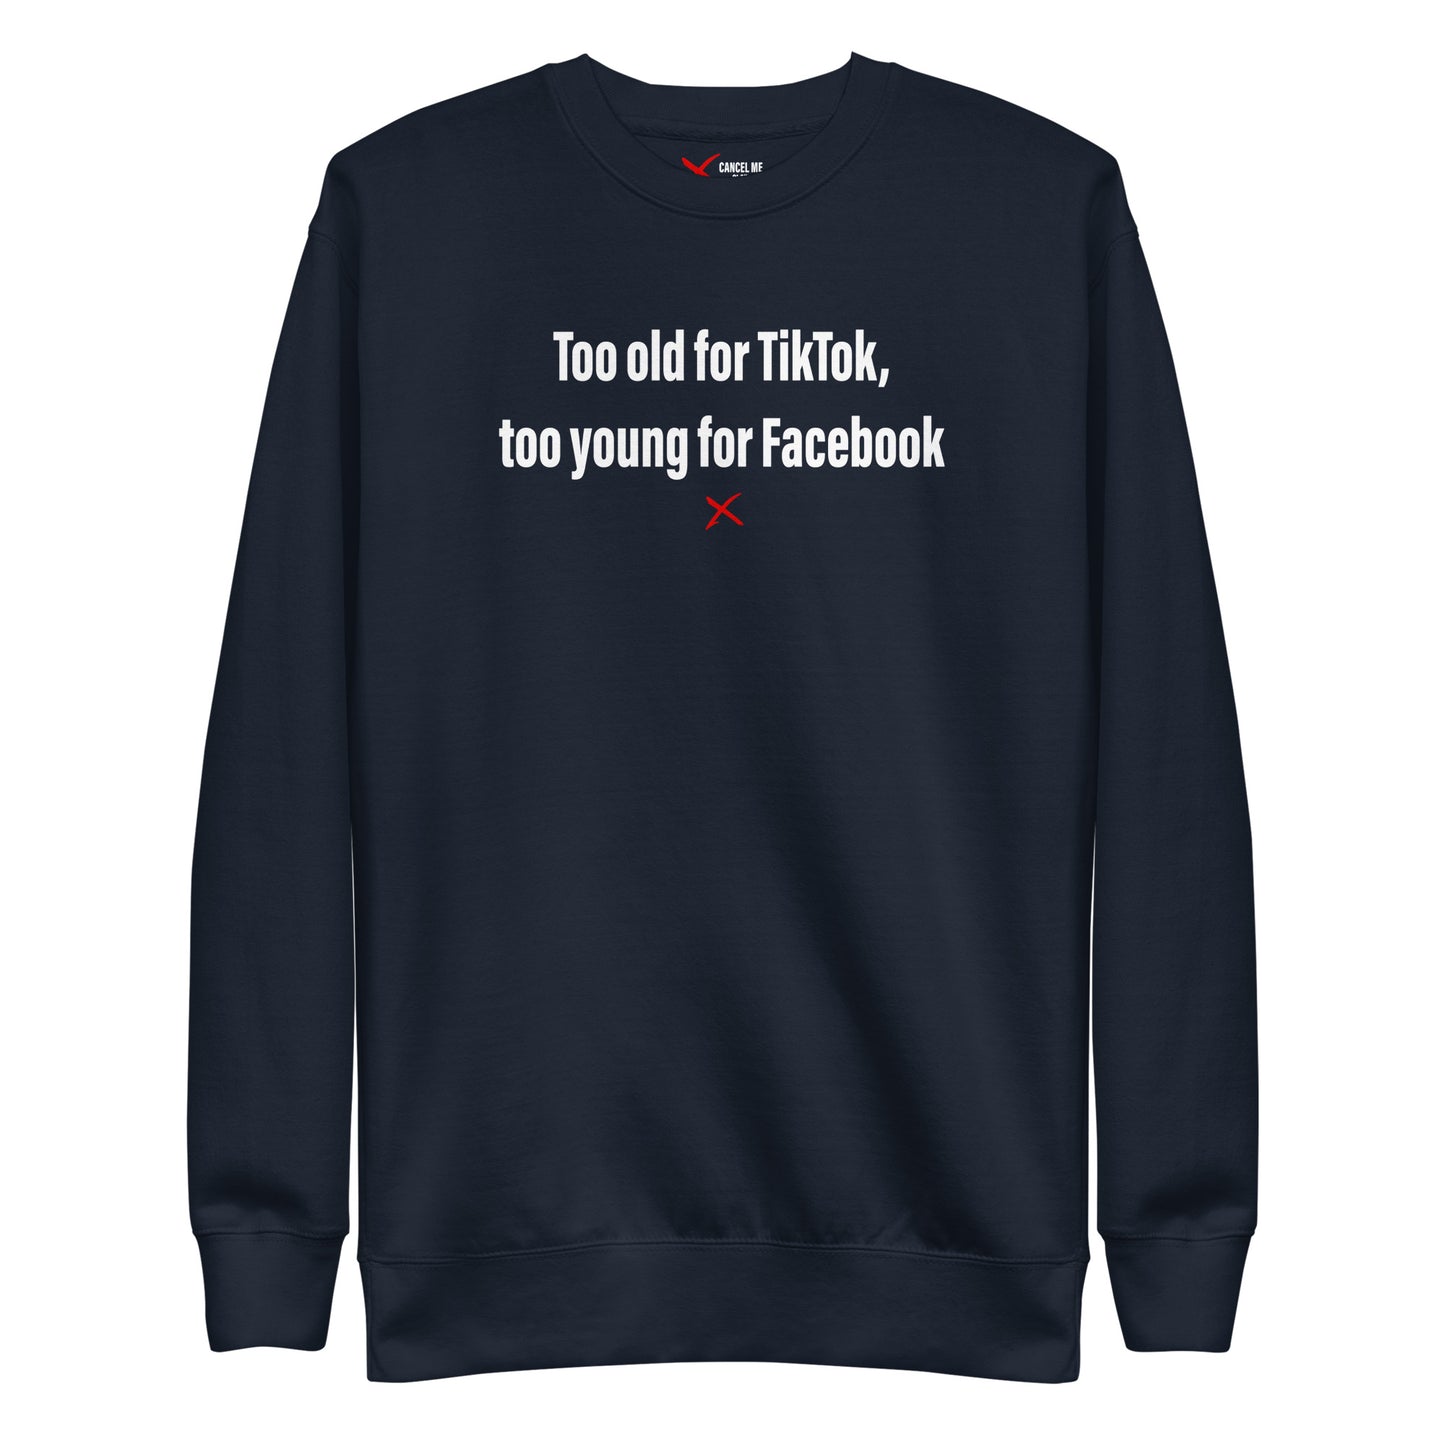 Too old for TikTok, too young for Facebook - Sweatshirt